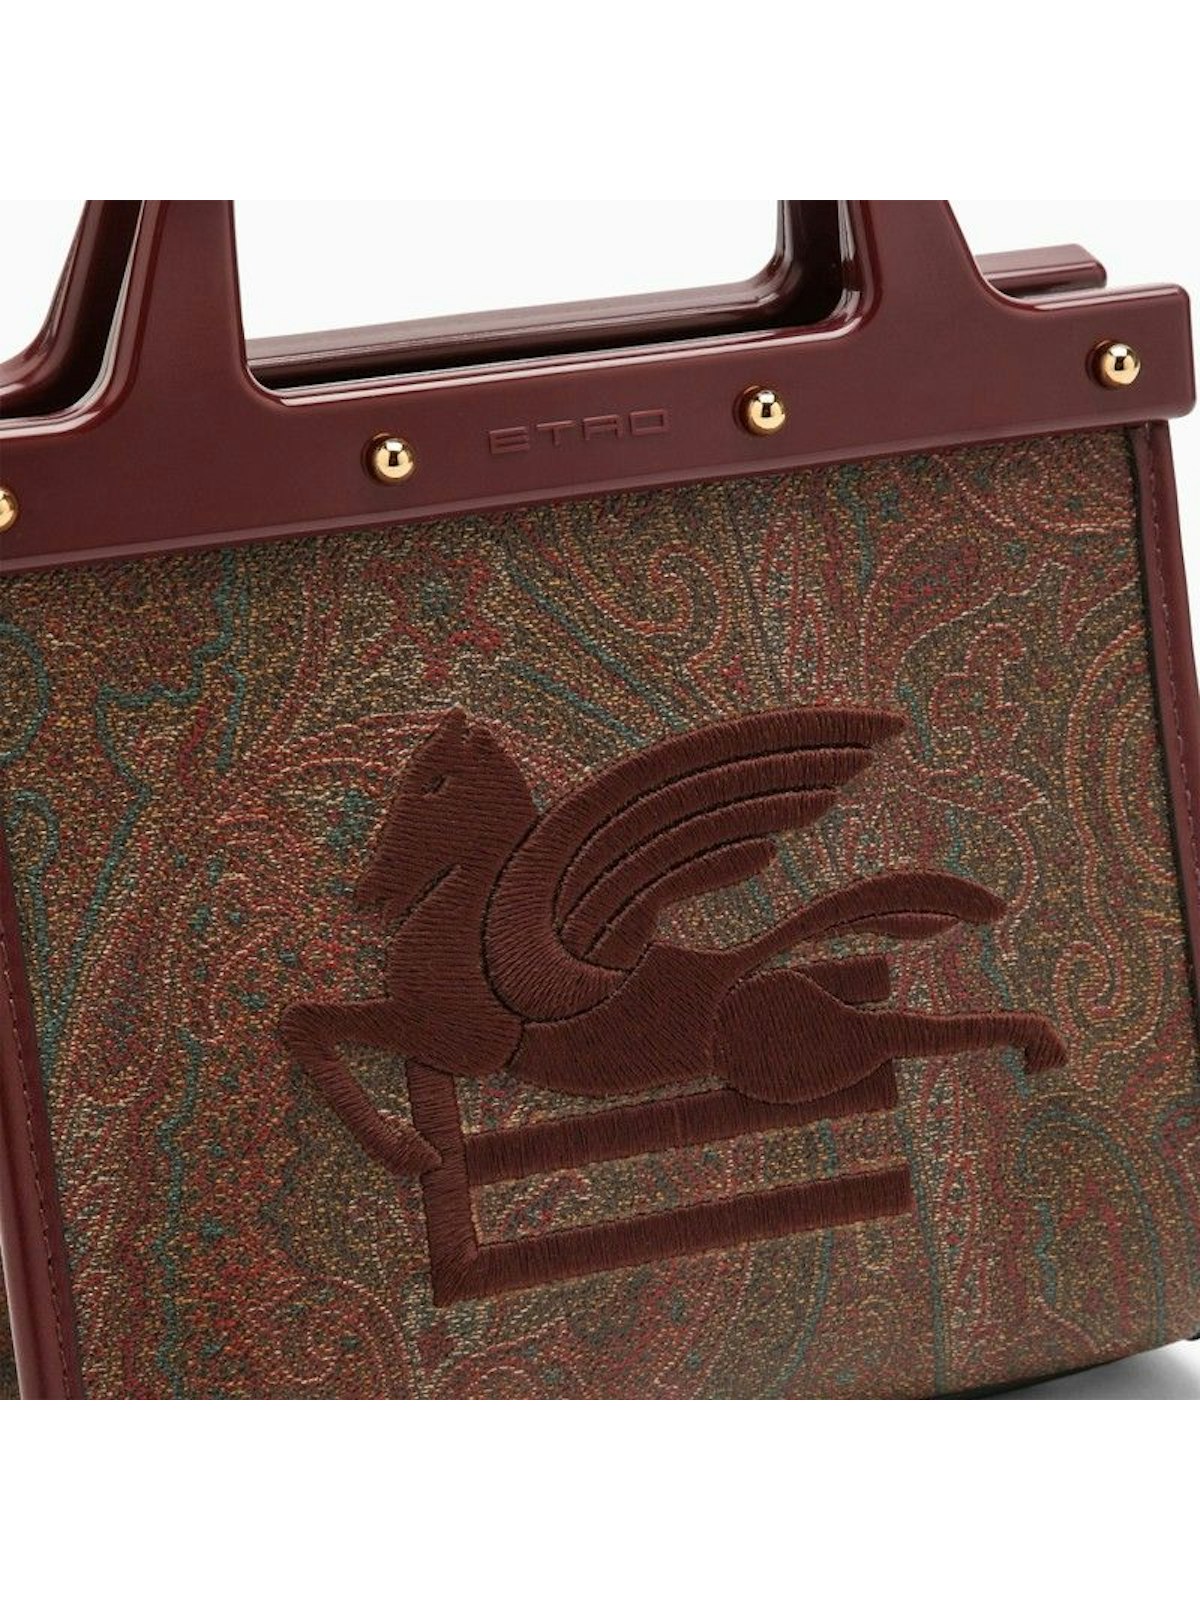 R0369 ETRO  LOVE TROTTER SMALL BURGUNDY BAG WITH JACQUARD PATTERN